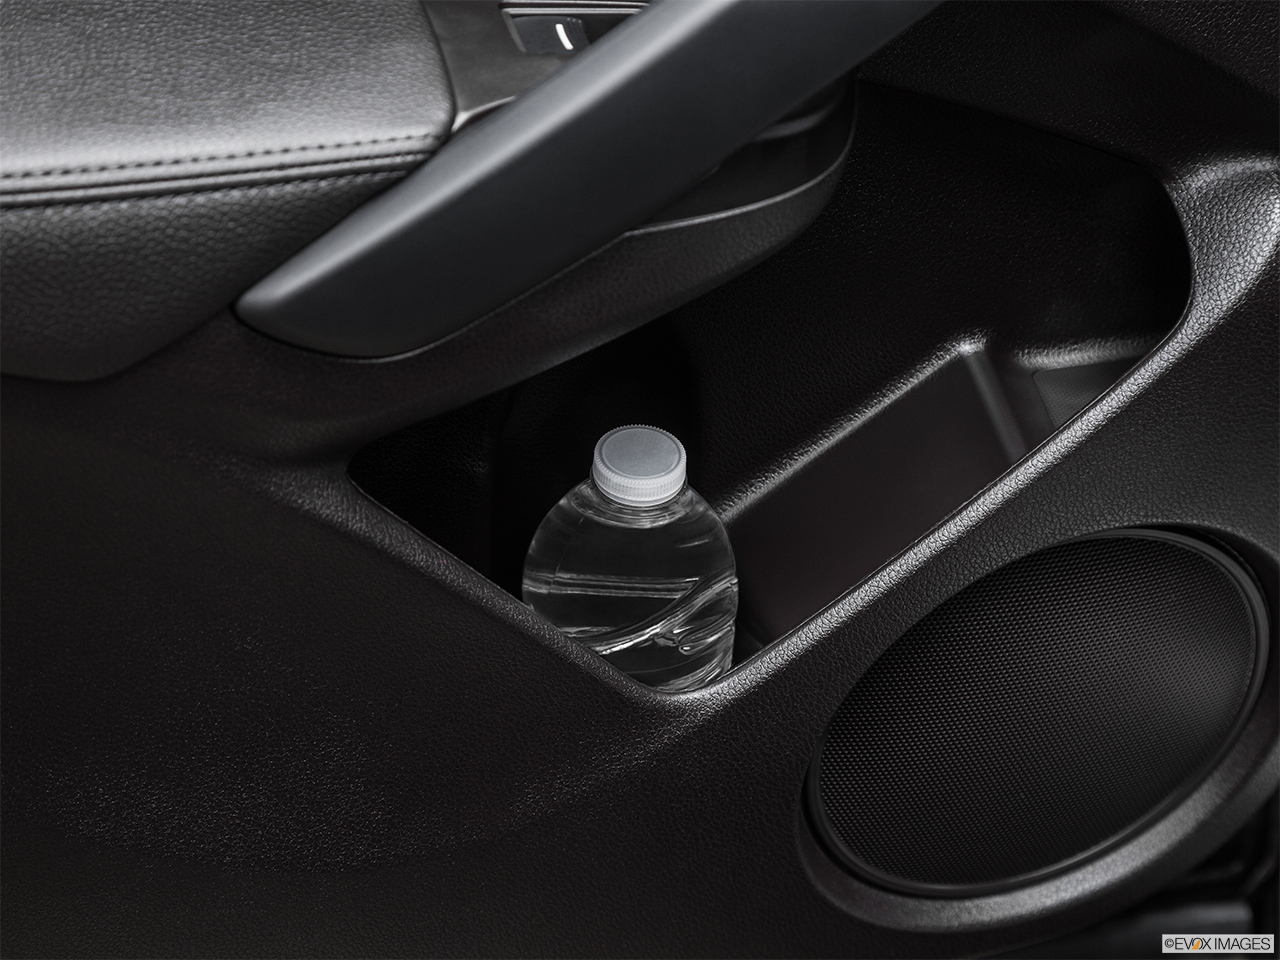 2016 Acura RDX Base Second row side cup holder with coffee prop, or second row door cup holder with water bottle. 